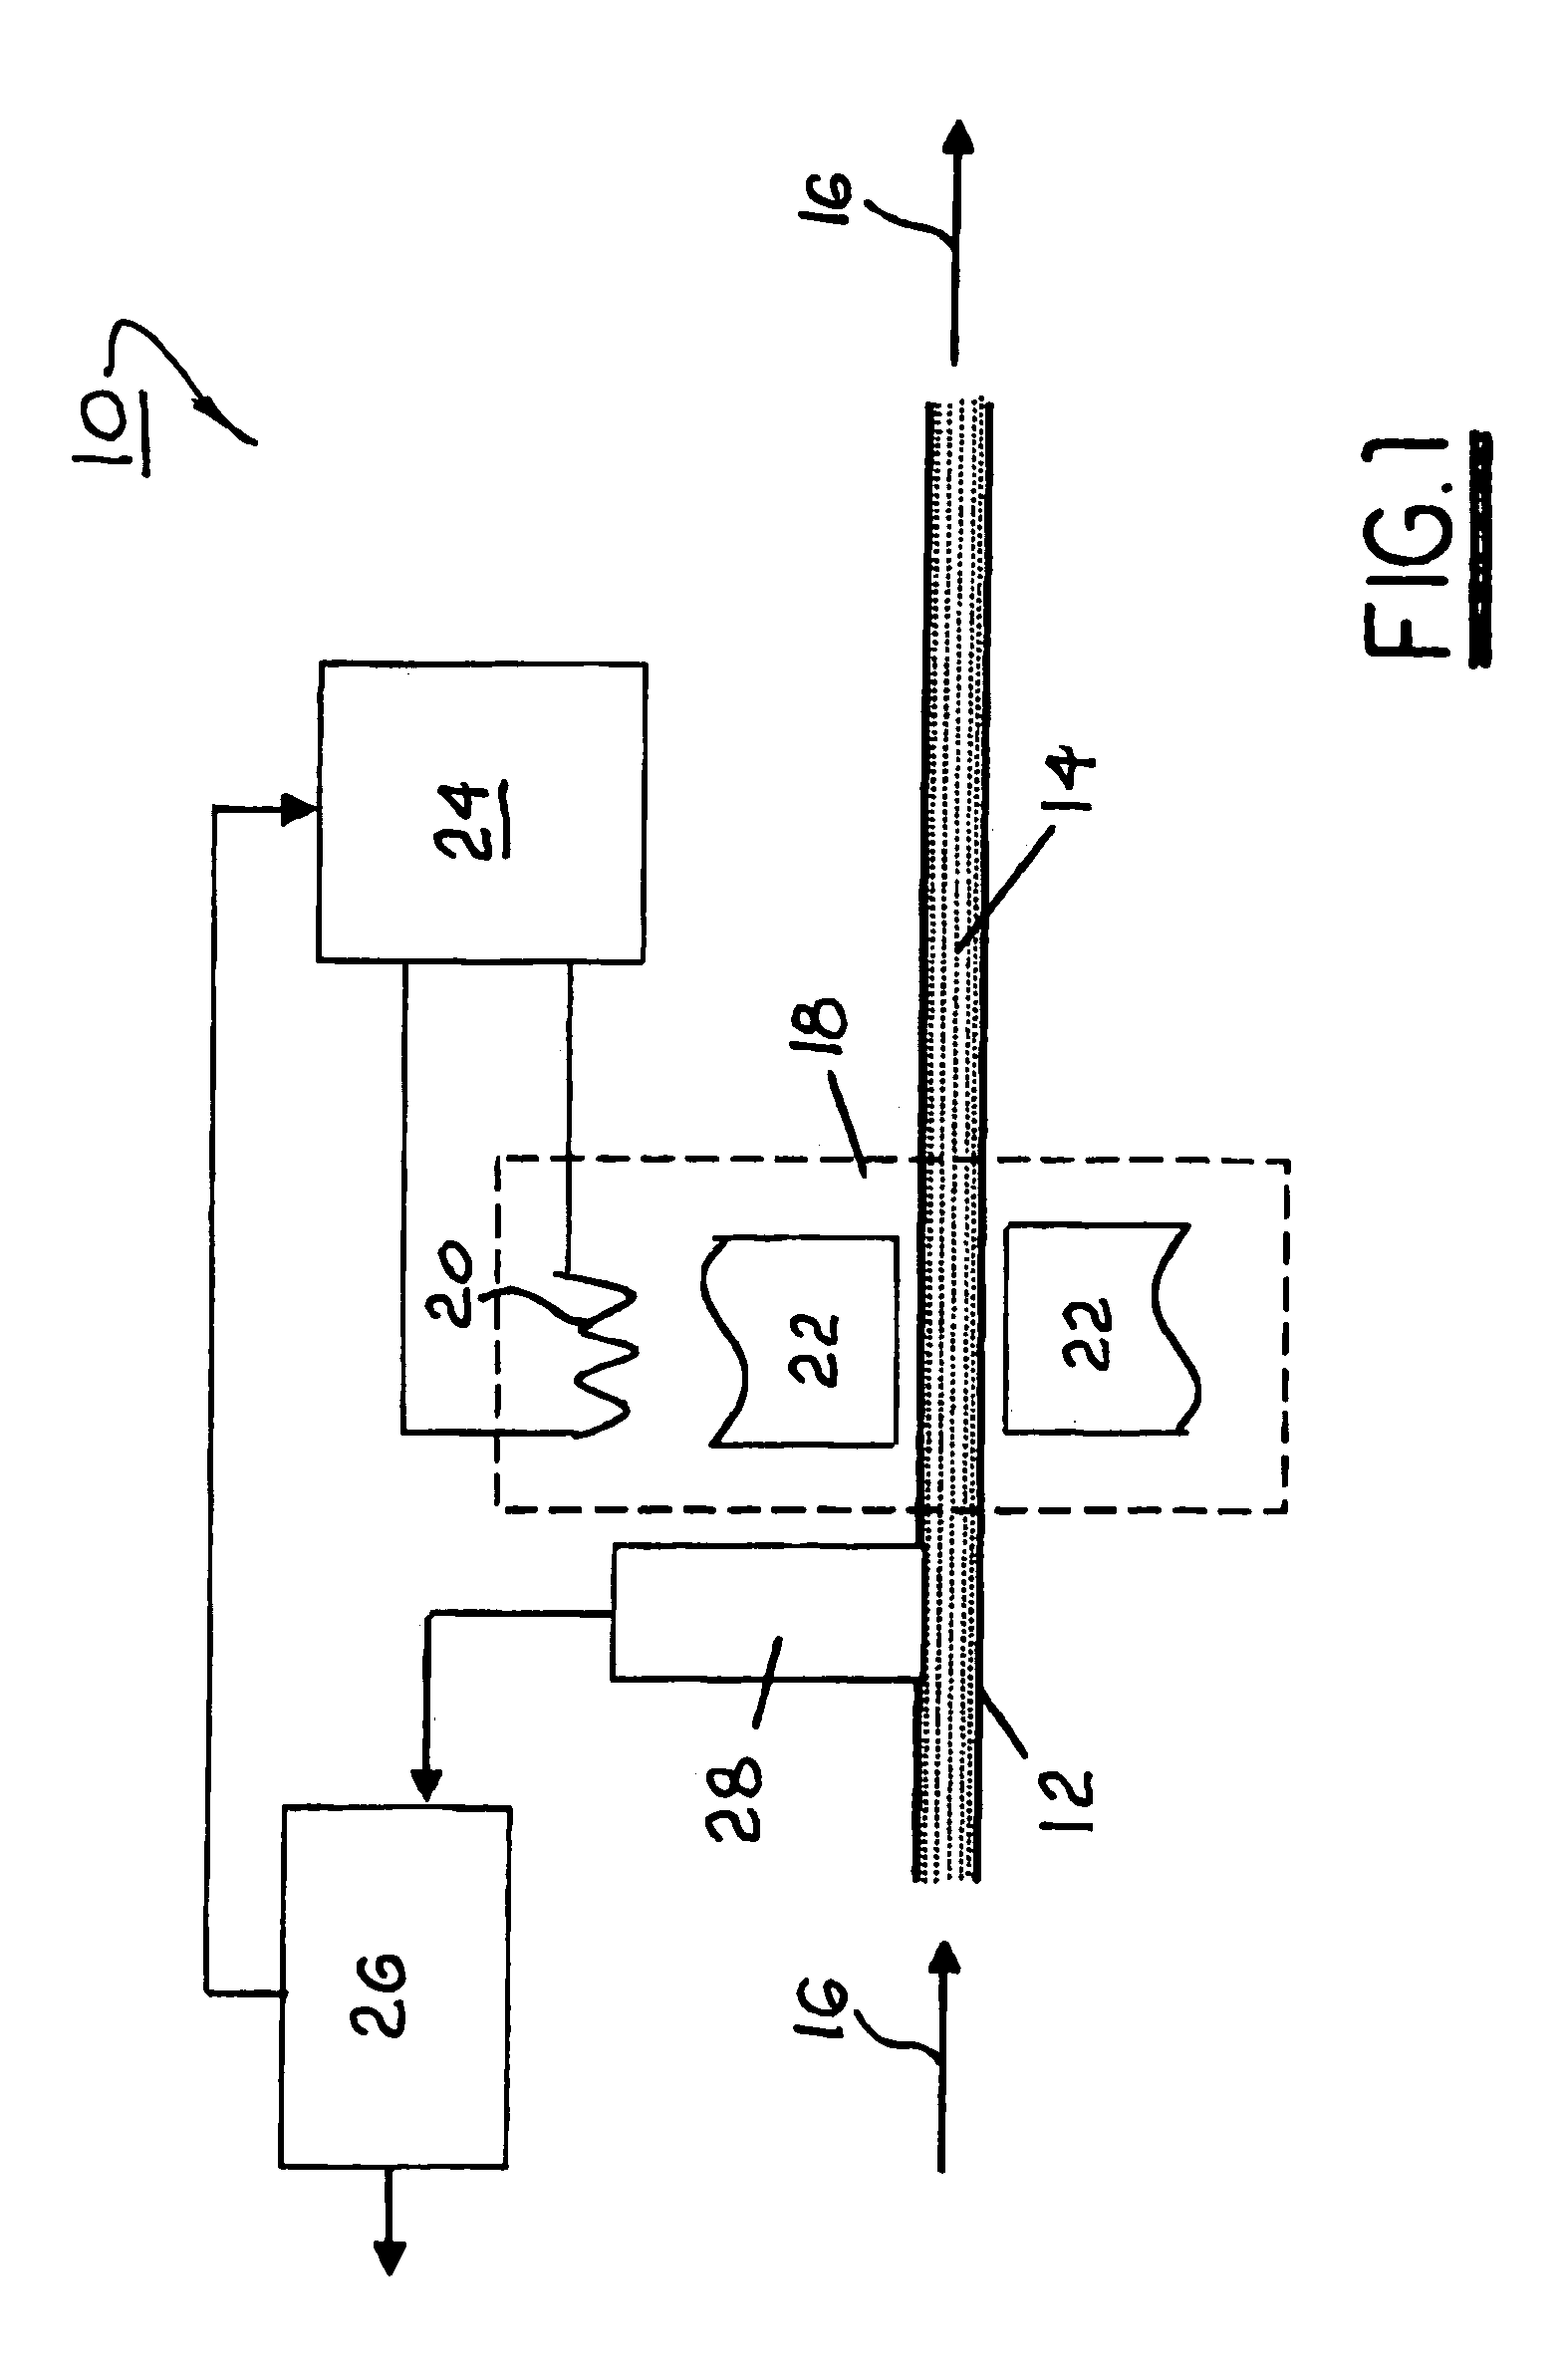 Method and apparatus for measuring and controlling solids composition of a magnetorheological fluid